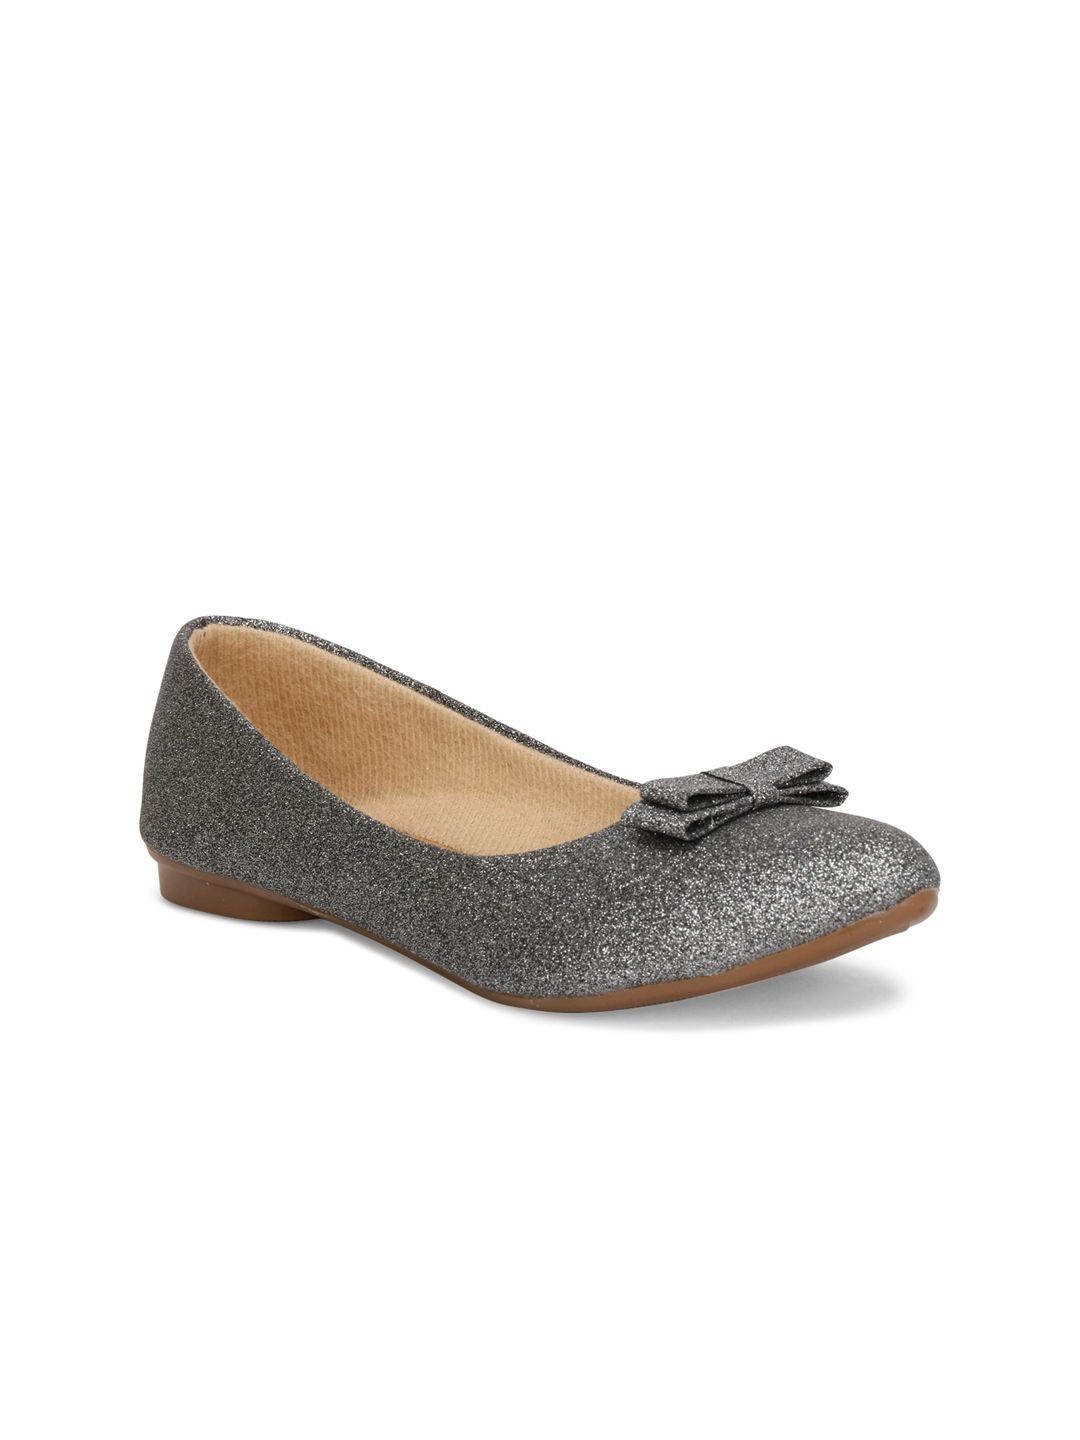 Denill Women Grey Ballerinas with Bows Flats Price in India